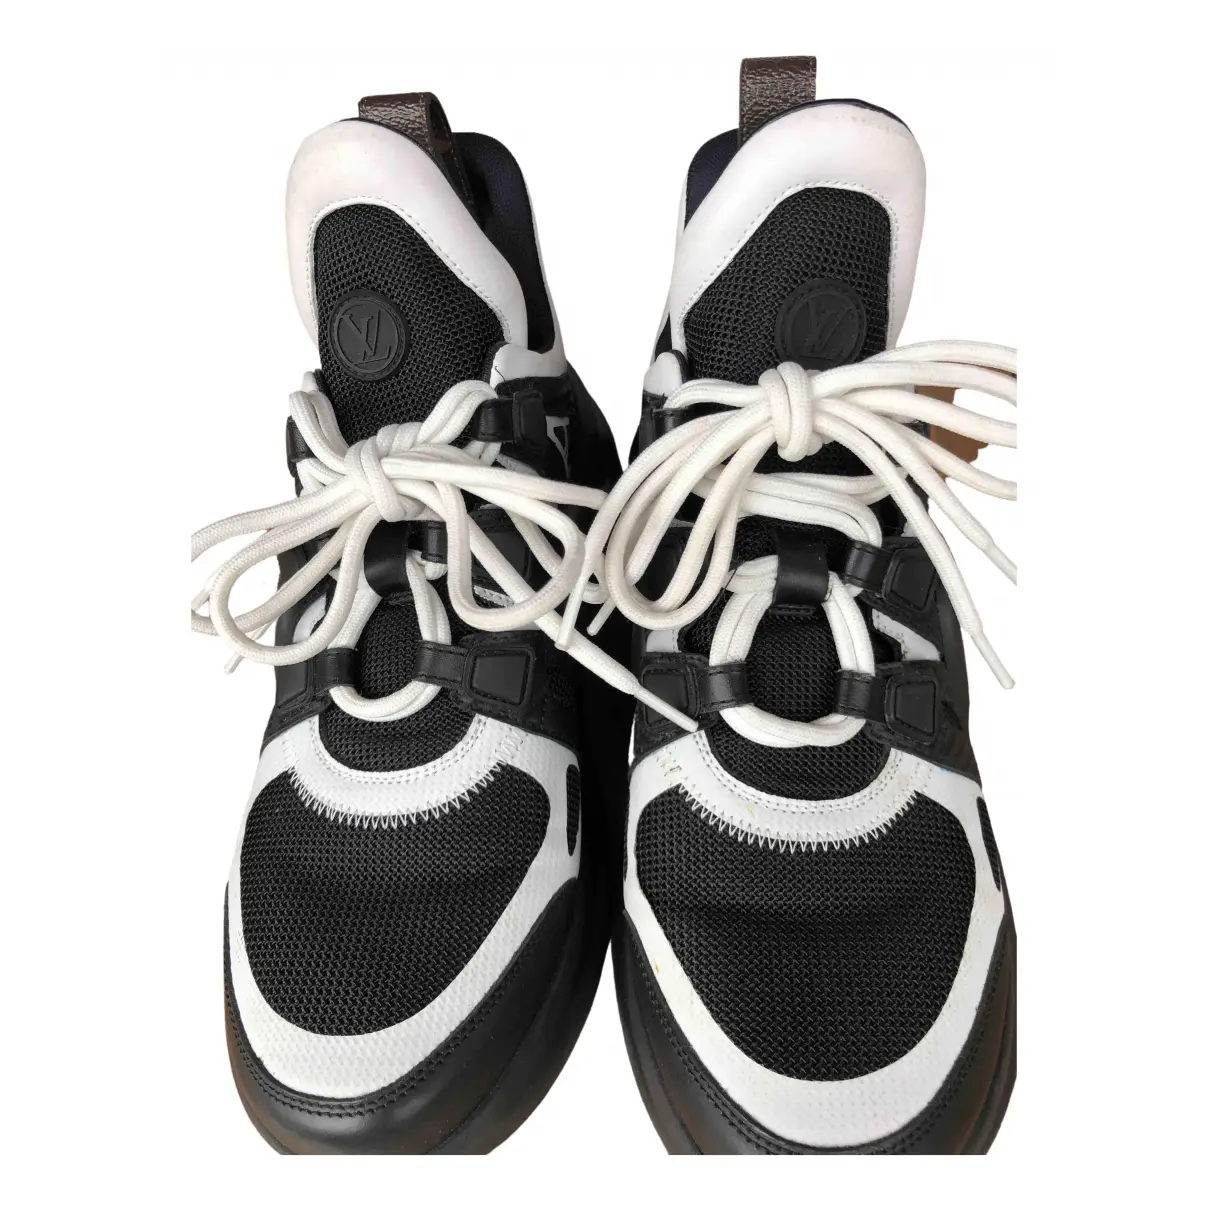 Buy Louis Vuitton Archlight cloth trainers online